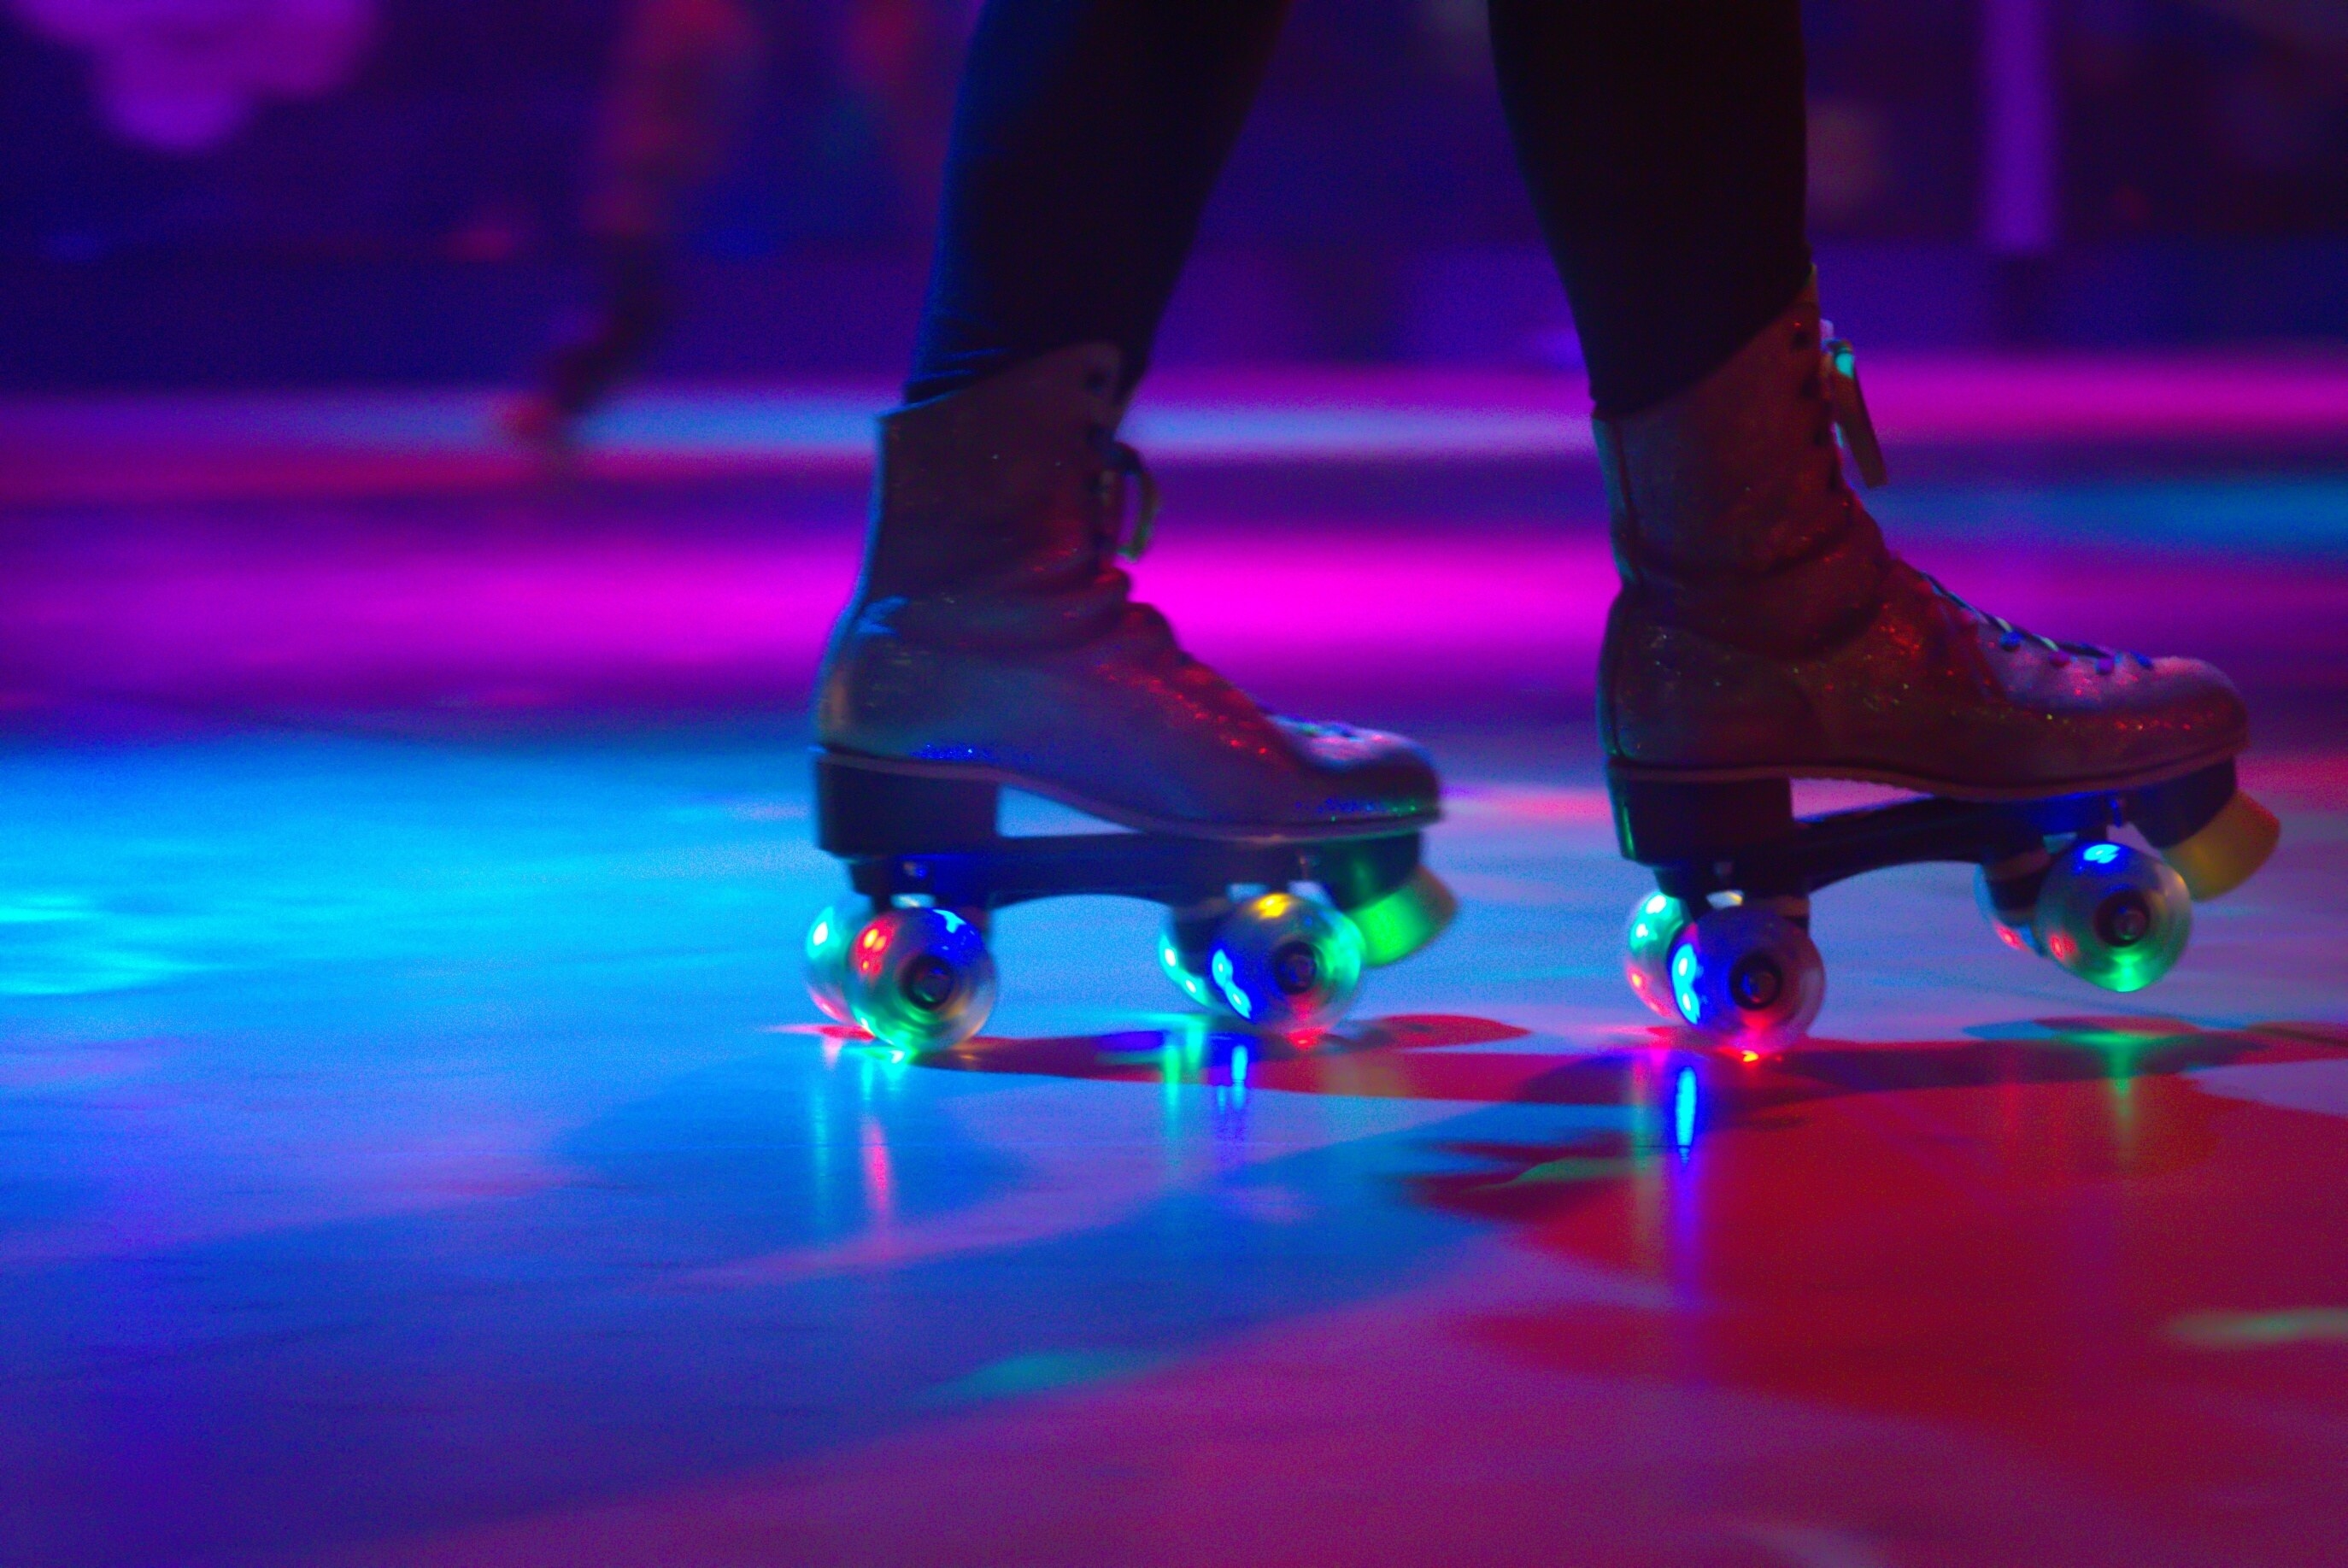 "A roller-skating rink was having a '90s-themed, adults-only nigh...